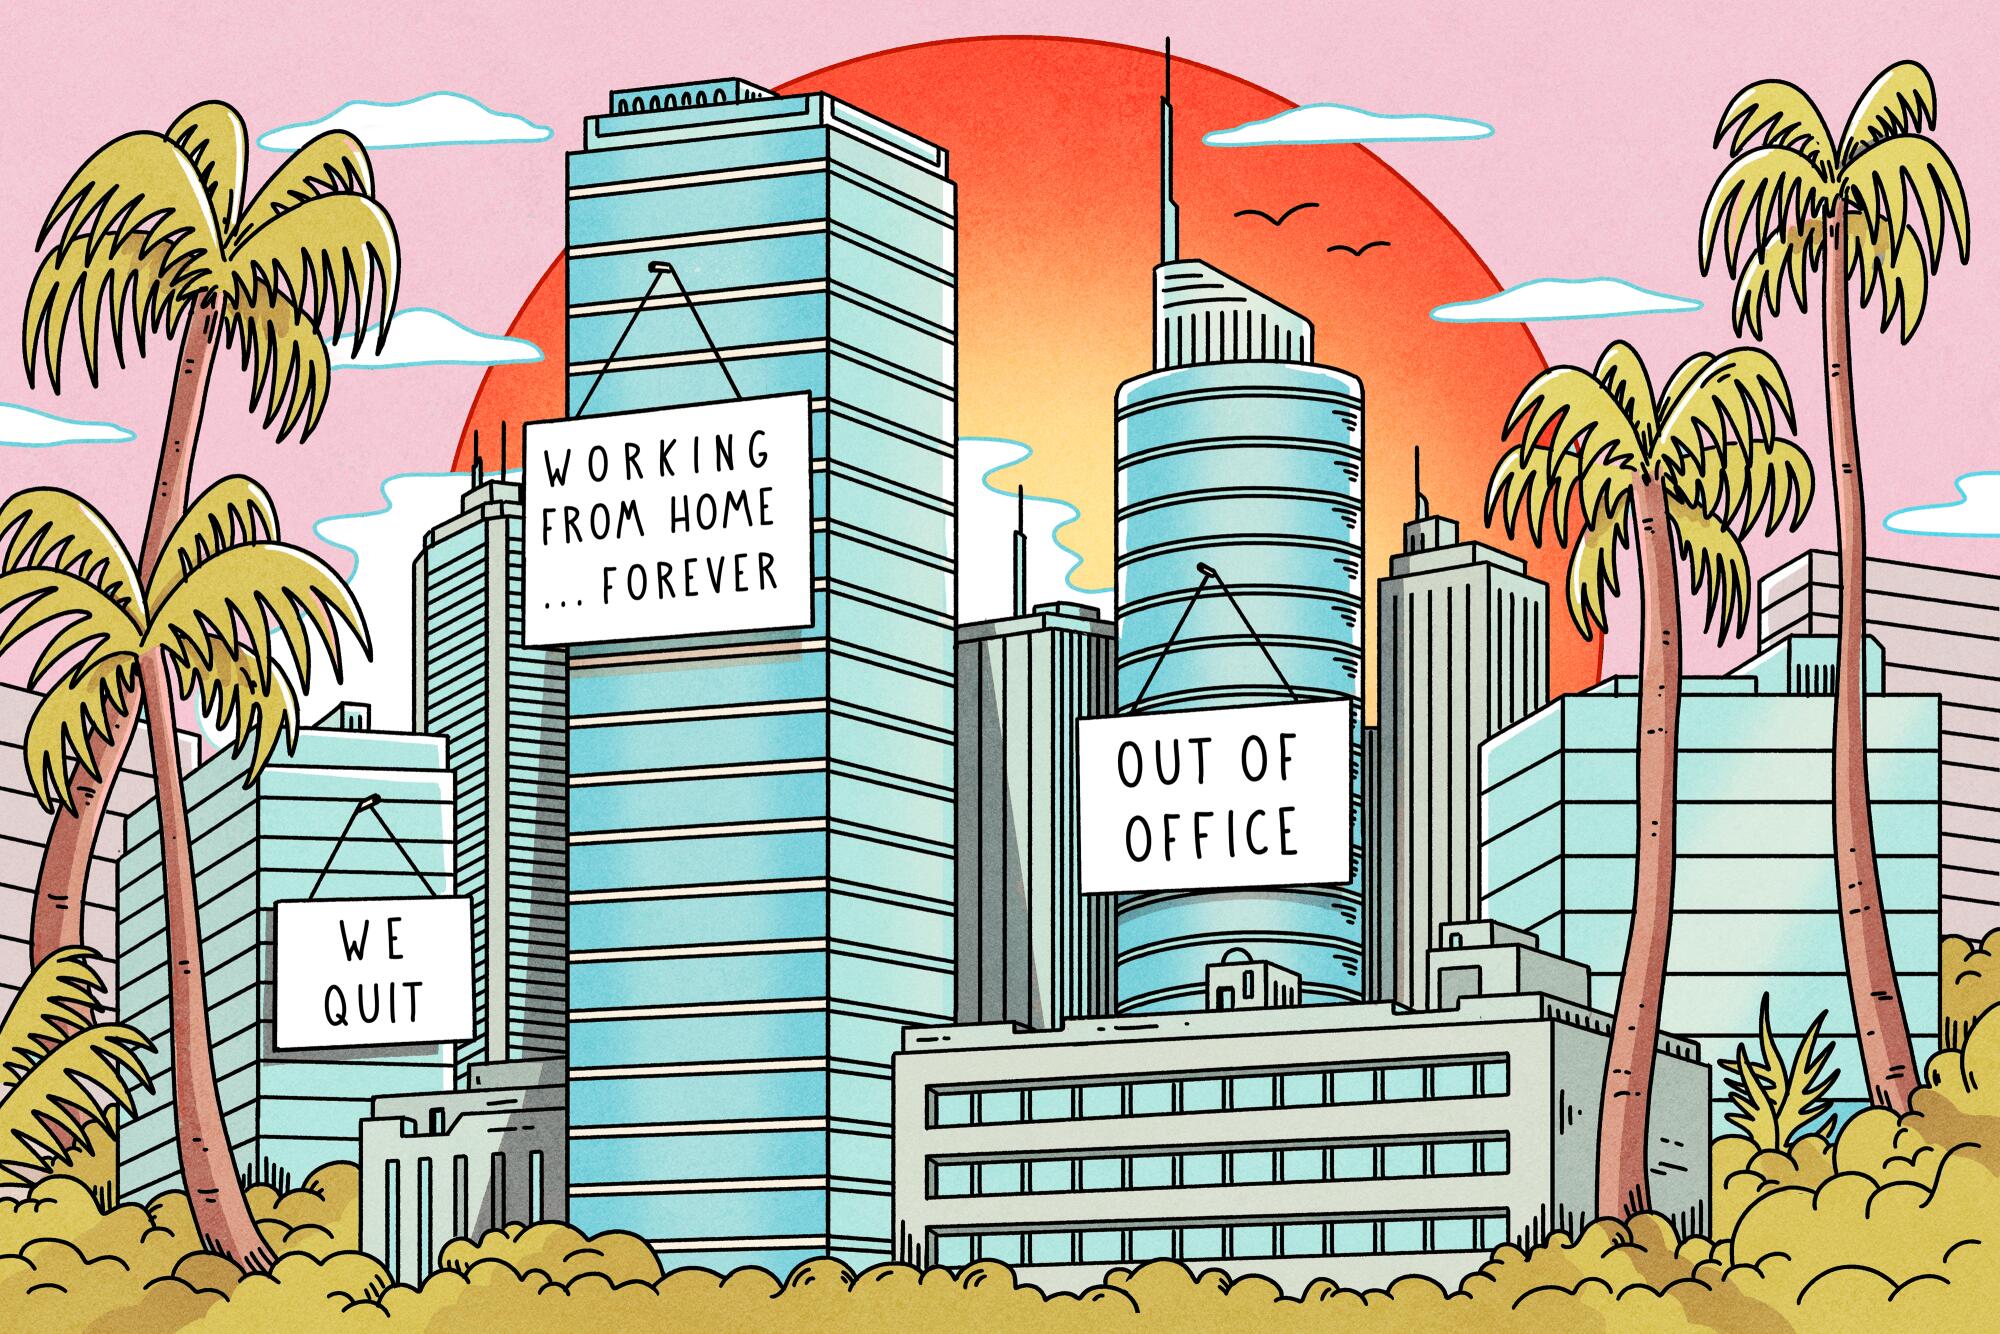 Los Angeles buildings with signs on them reading "We Quit" and "Out of Office"